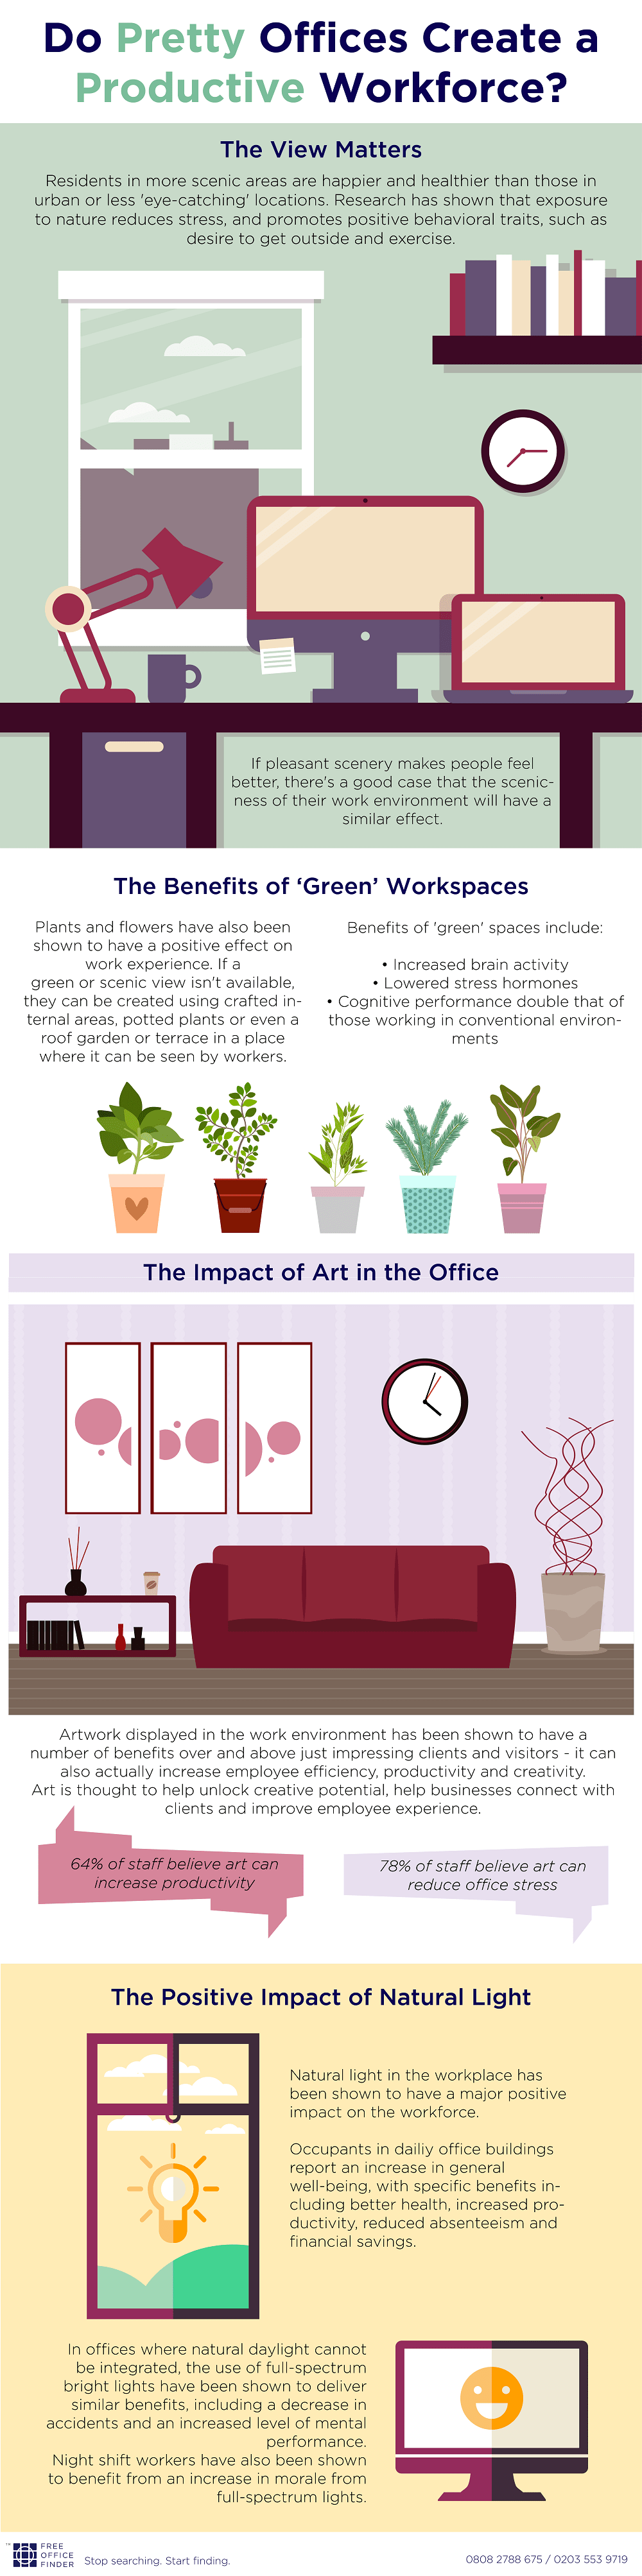 Do Pretty Offices Create a Productive Workforce? (infographic)